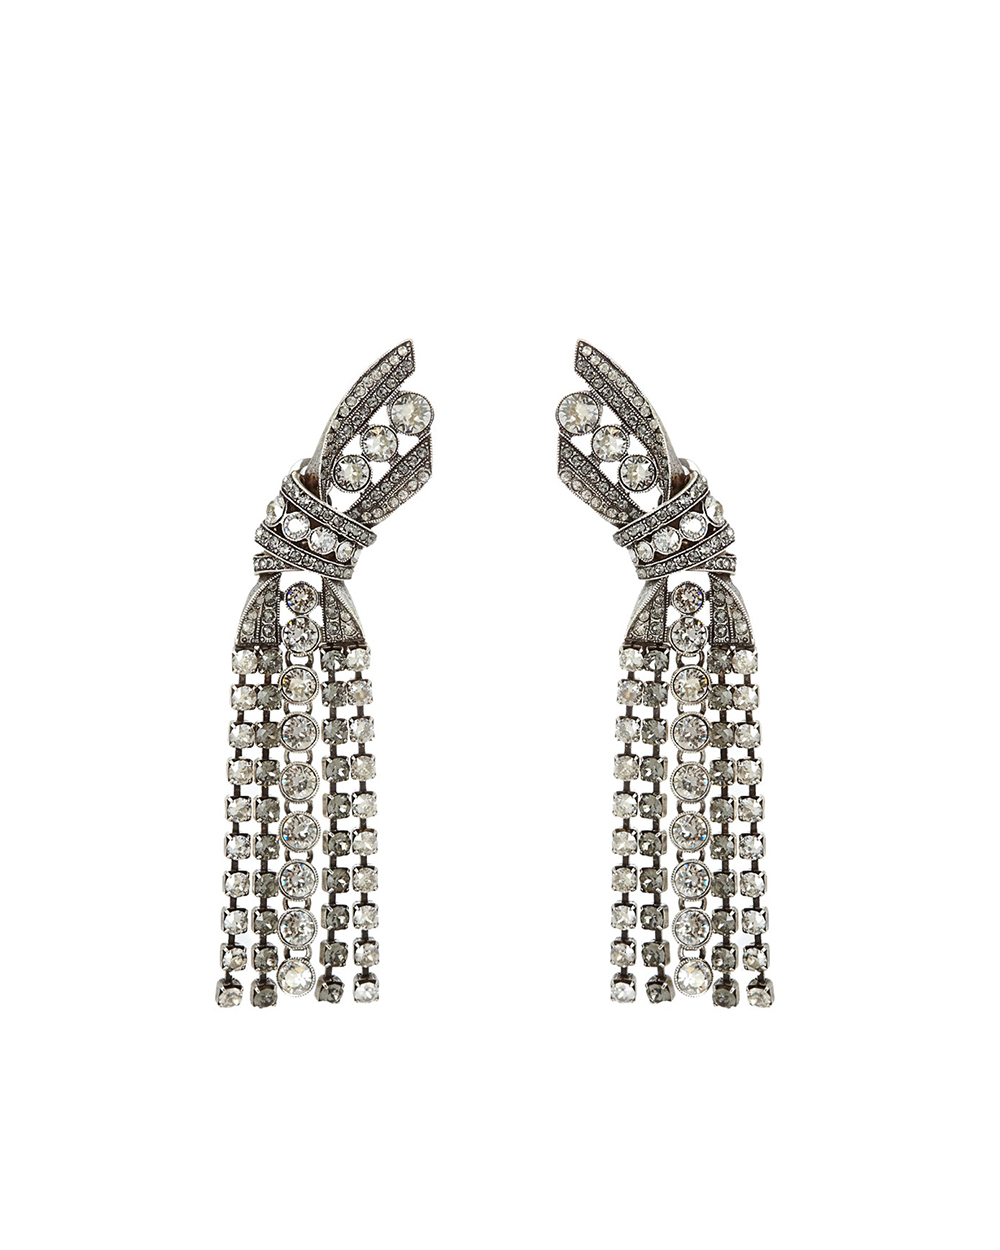 Lanvin earrings, $870, from Matches Fashion.